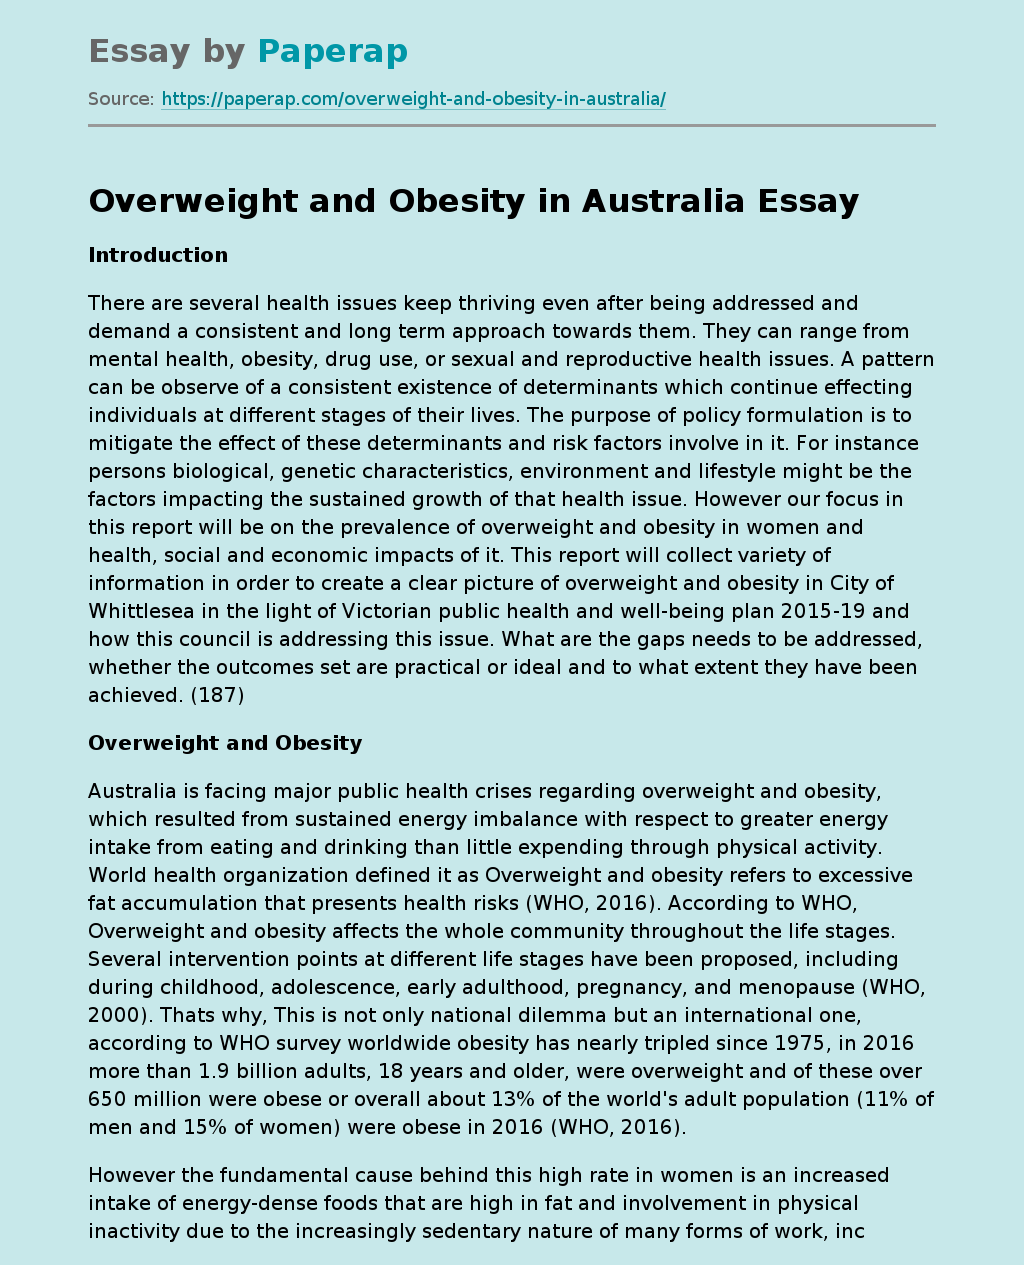 Overweight and Obesity in Australia